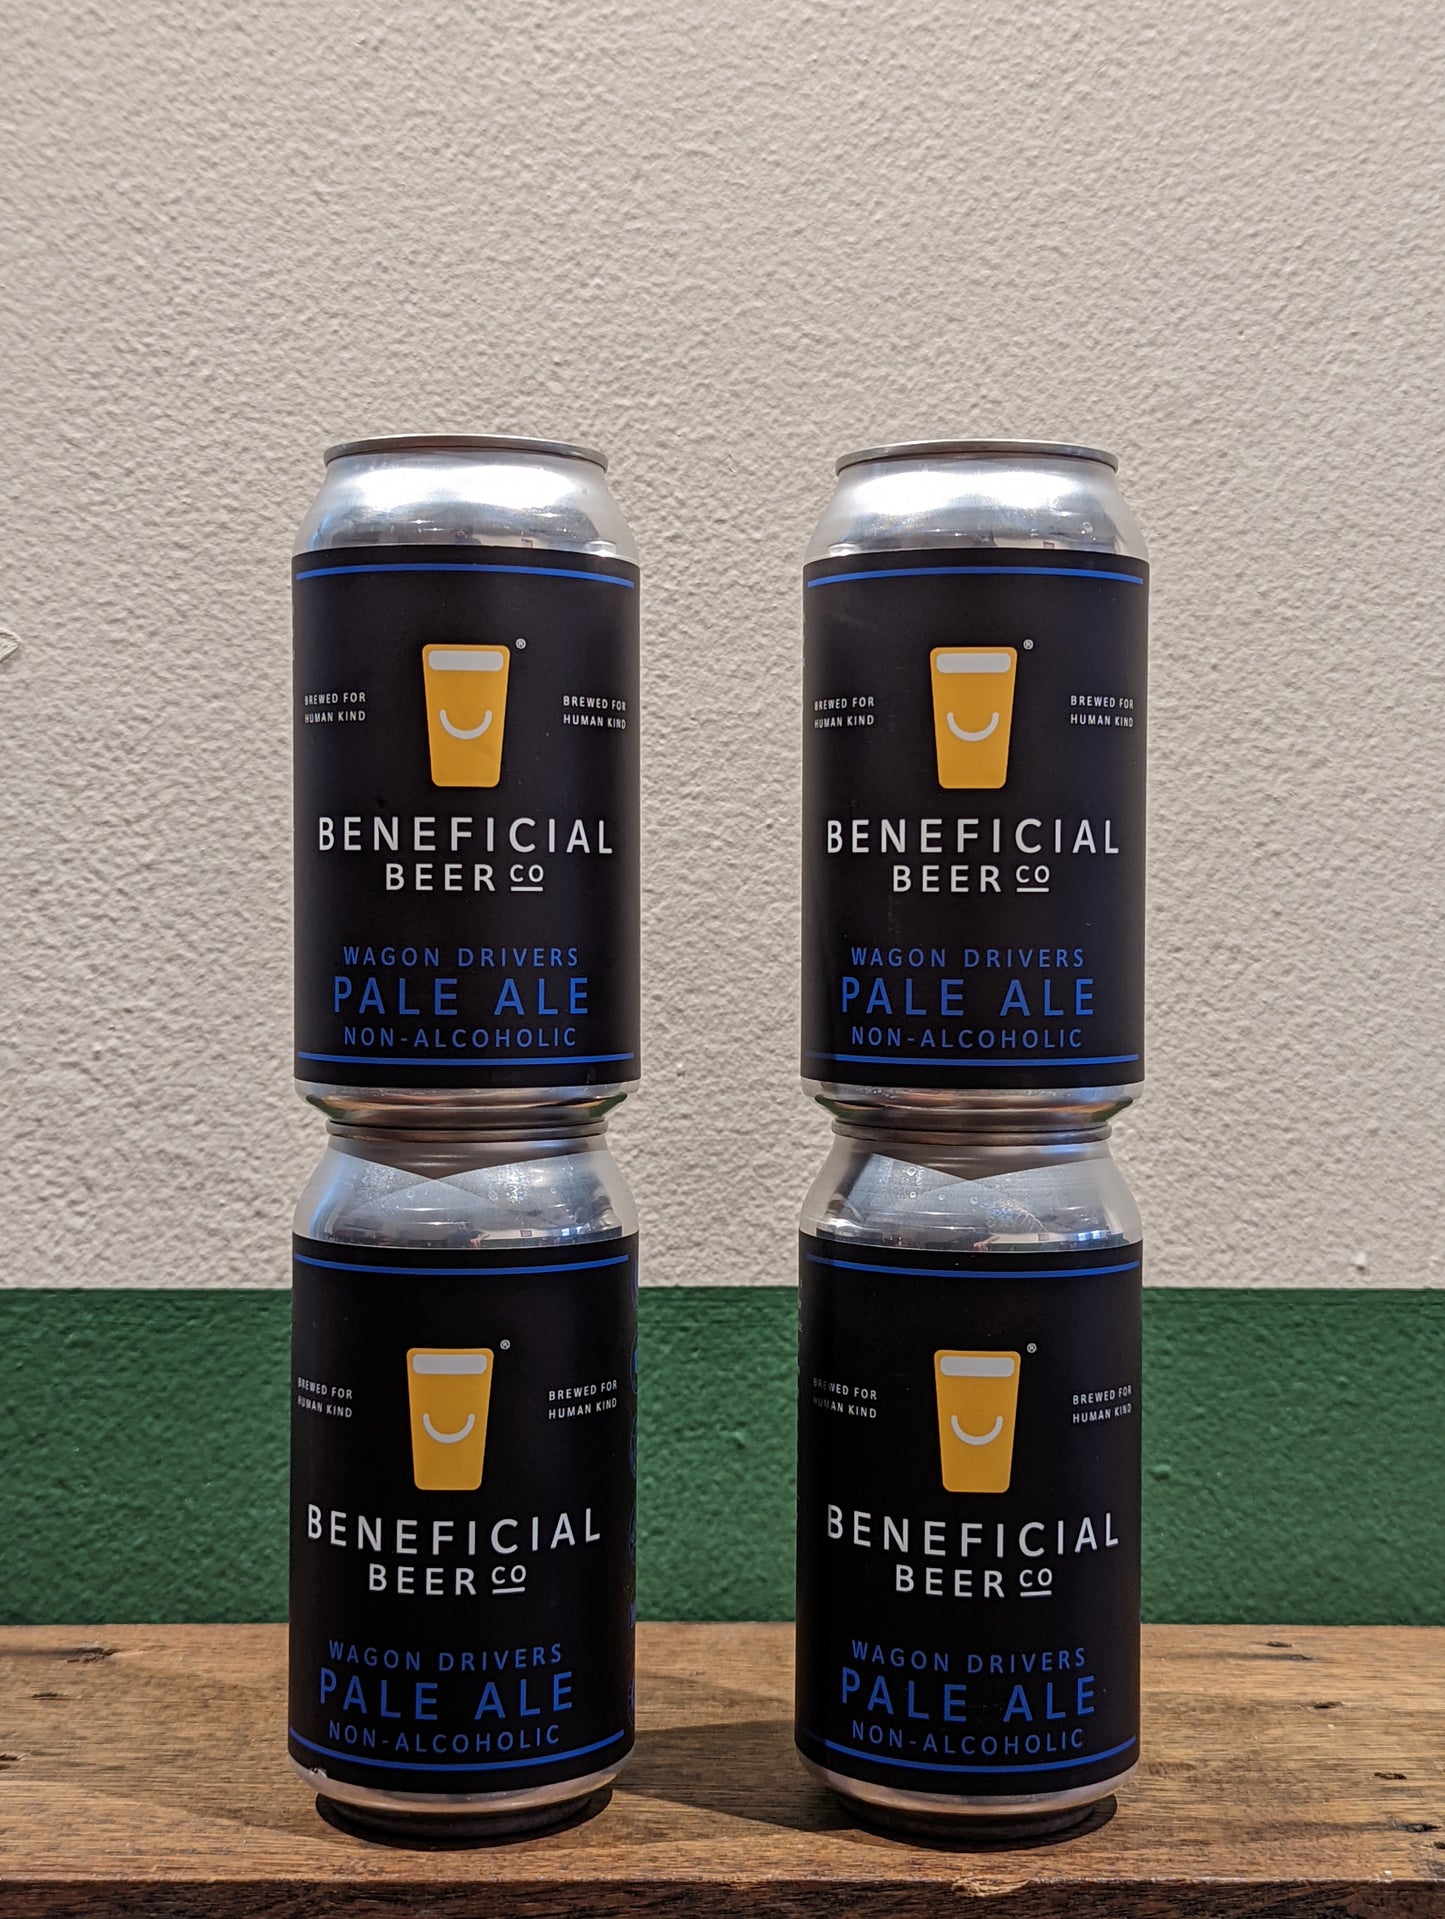 Beneficial Beer Co. - Wagon Driver Pale Ale (Non Alcoholic)